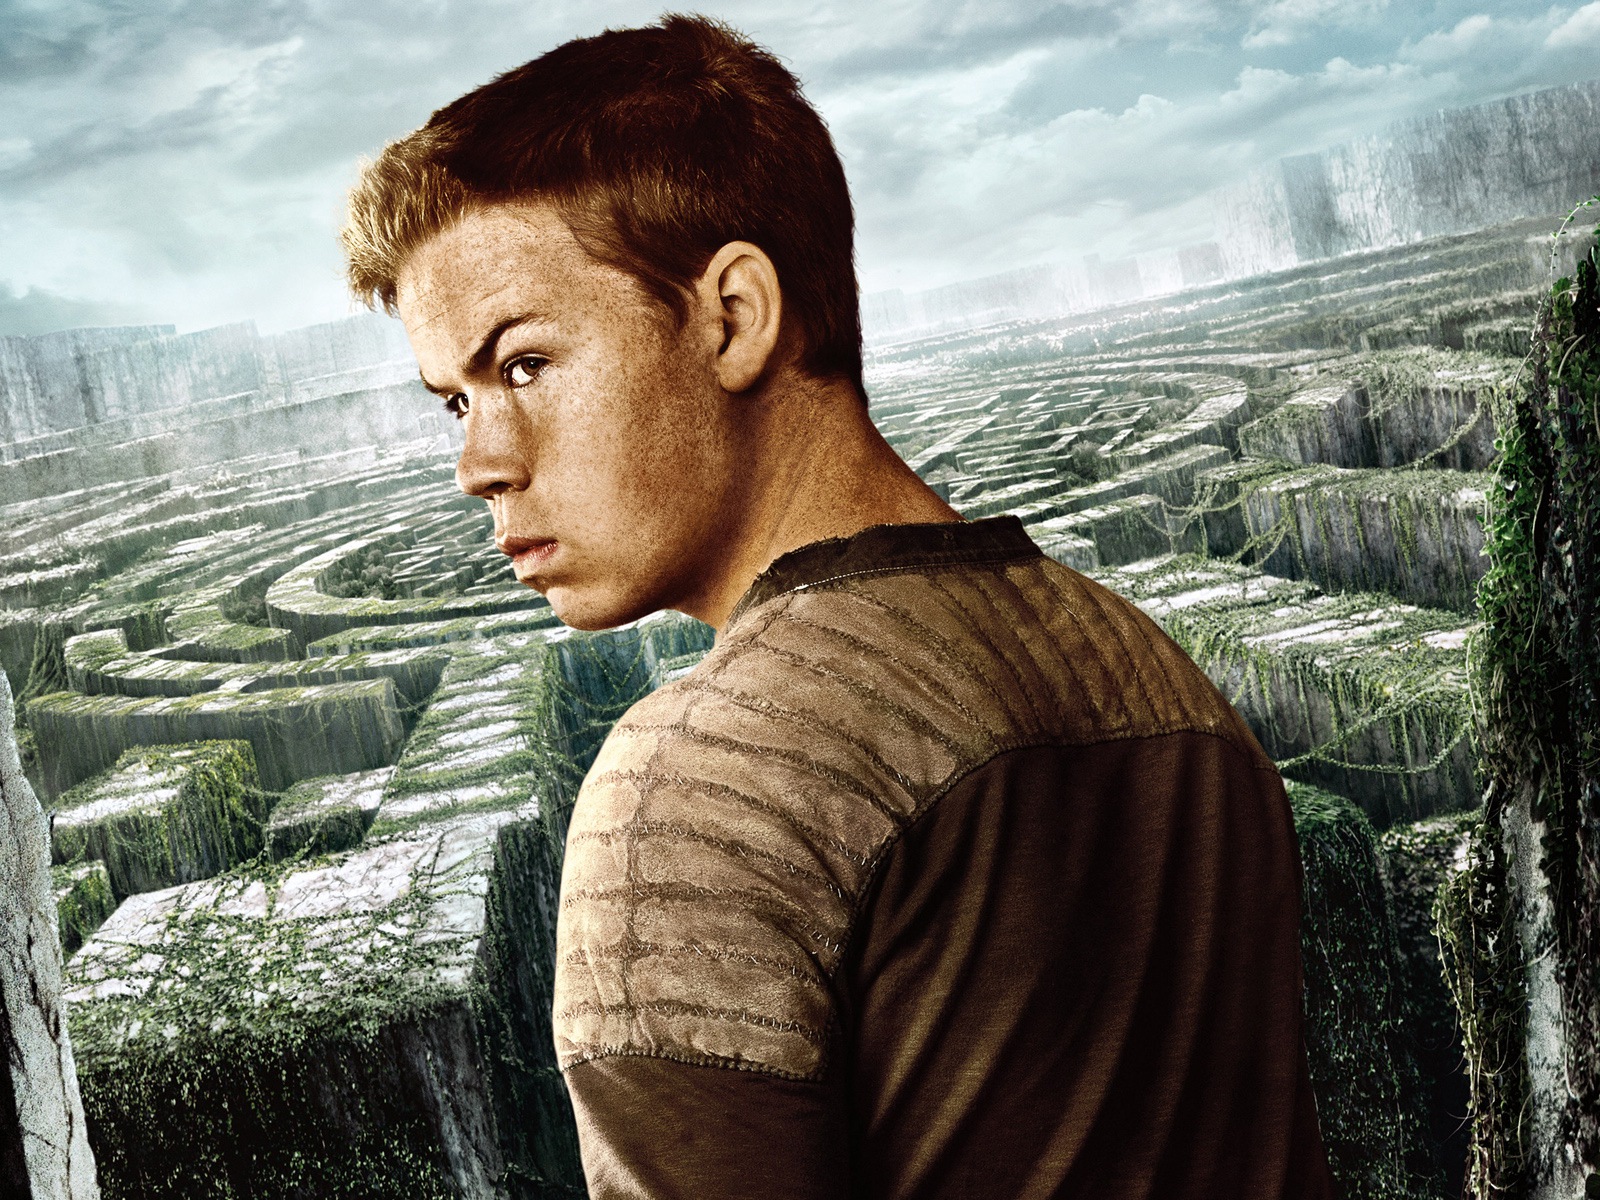 The Maze Runner HD movie wallpapers #11 - 1600x1200